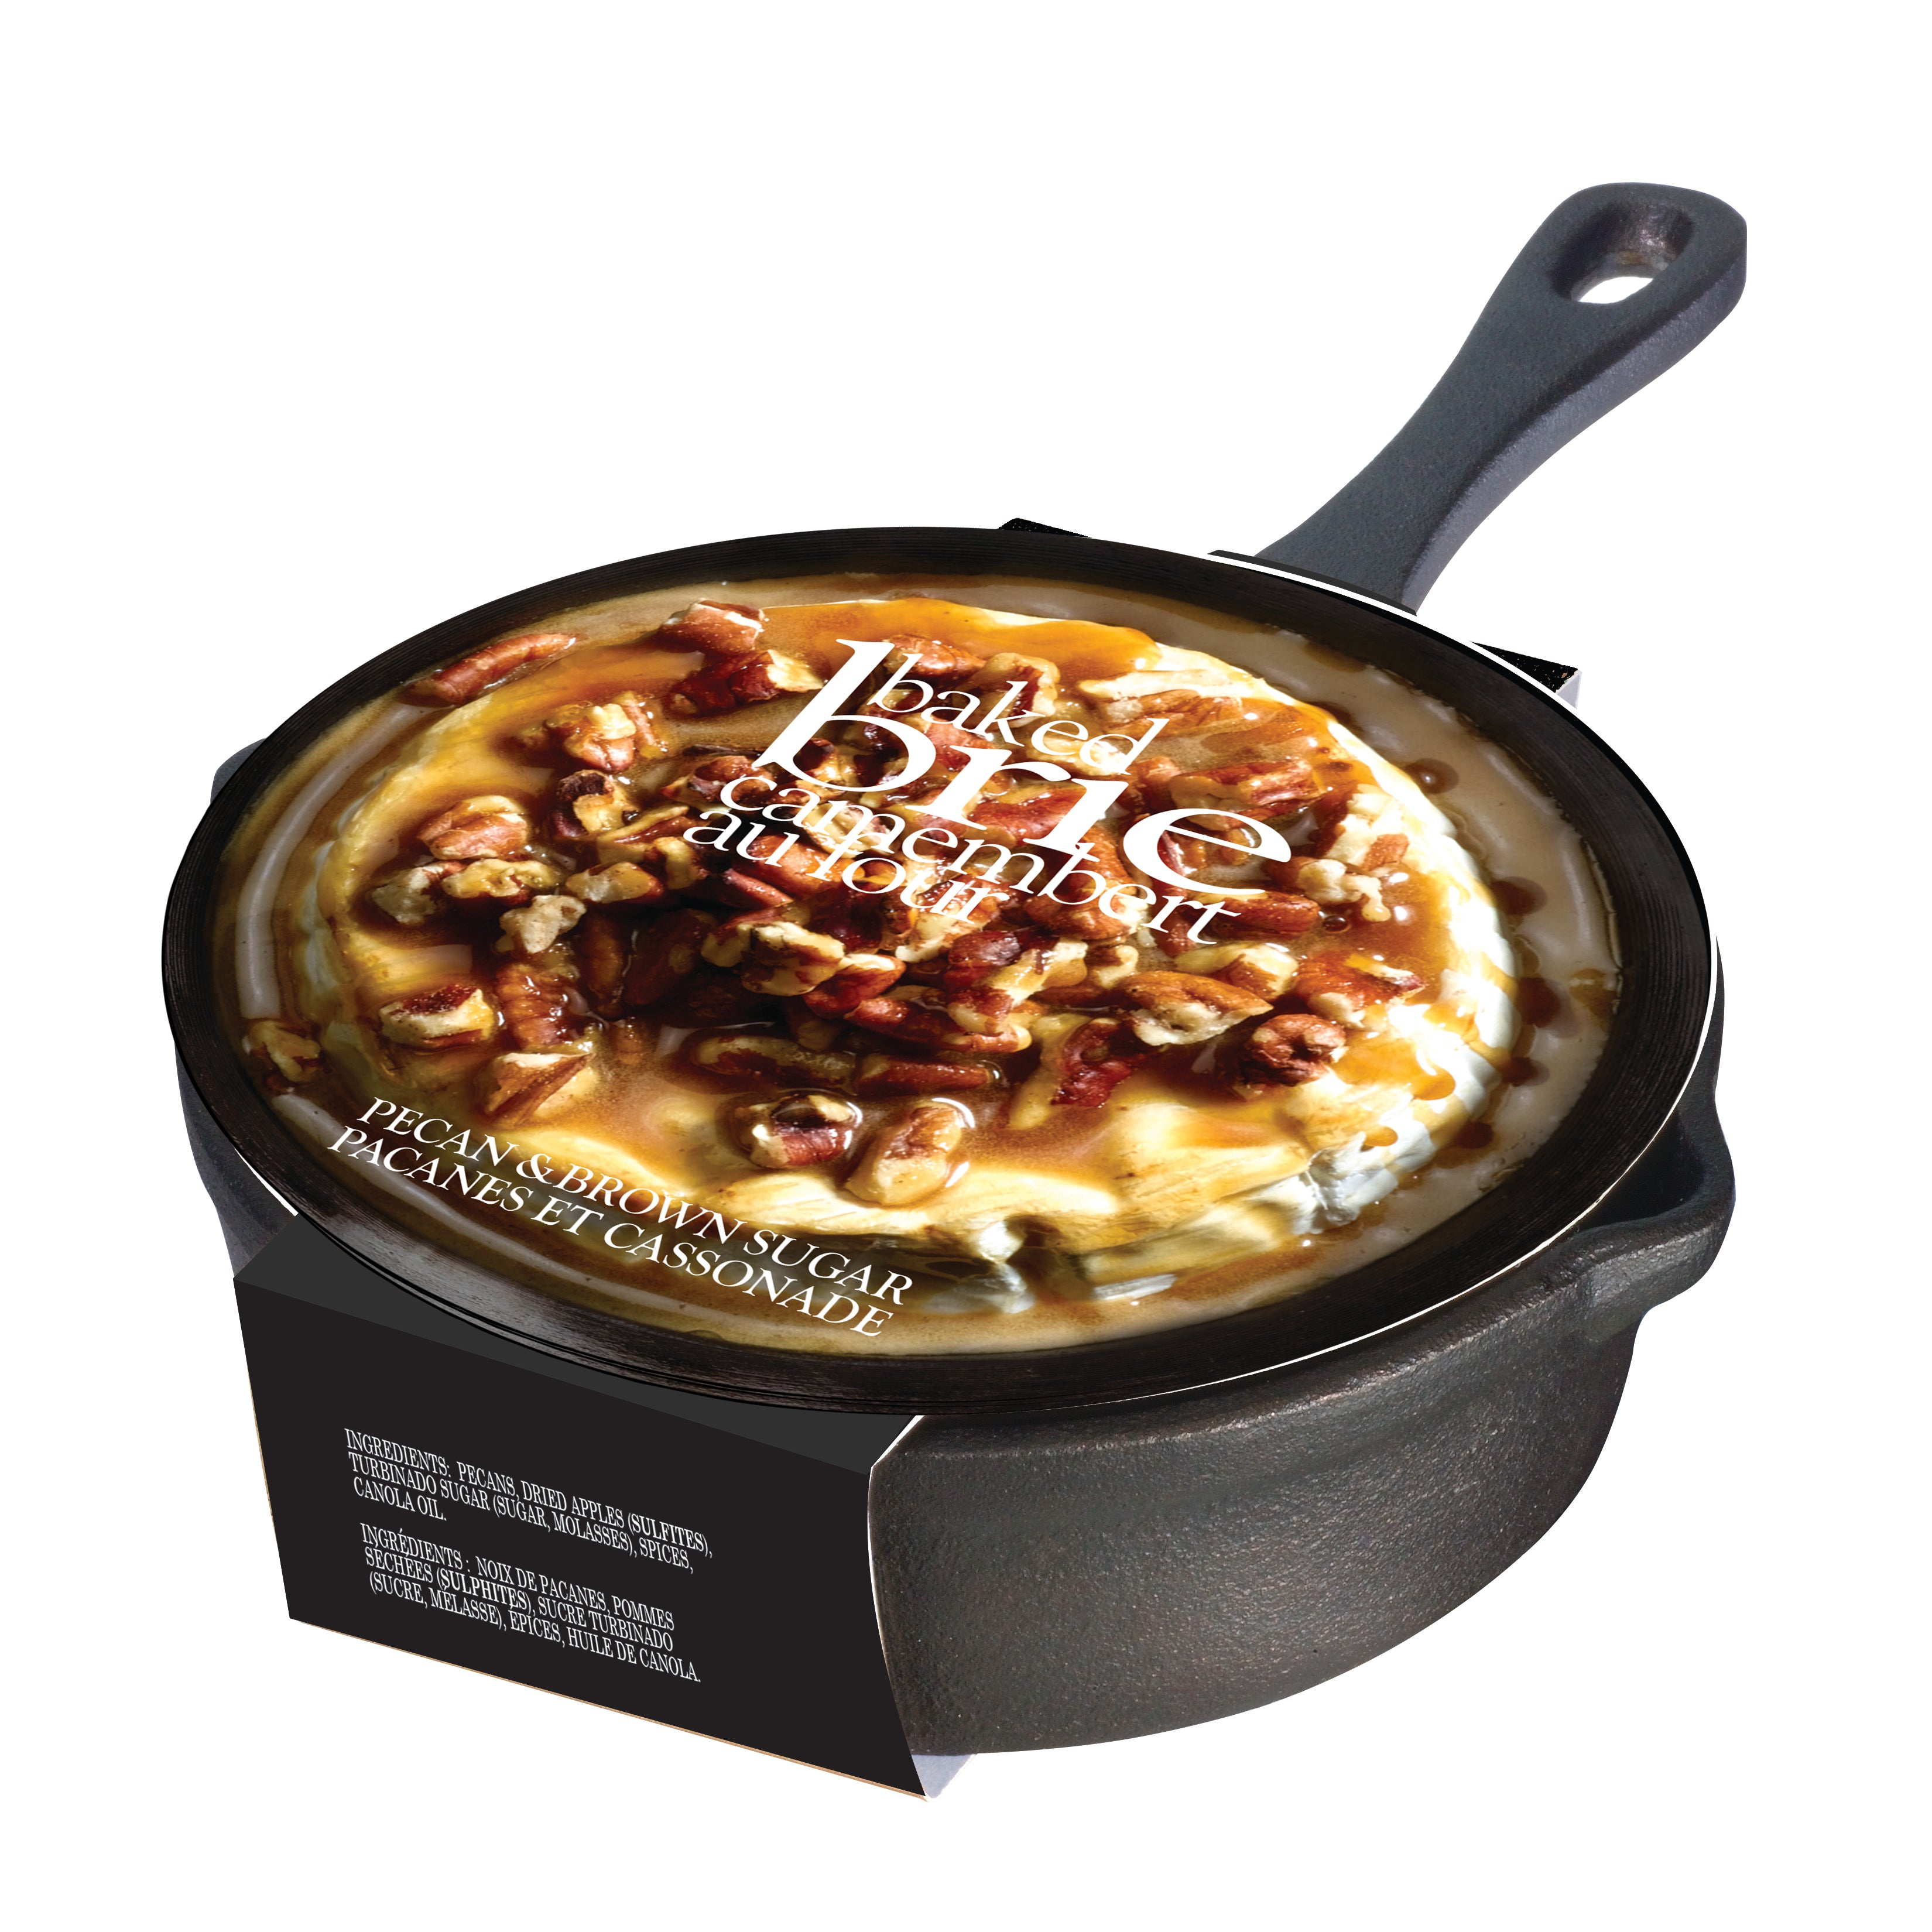 Cast Iron Pan with Baked Brie Topping